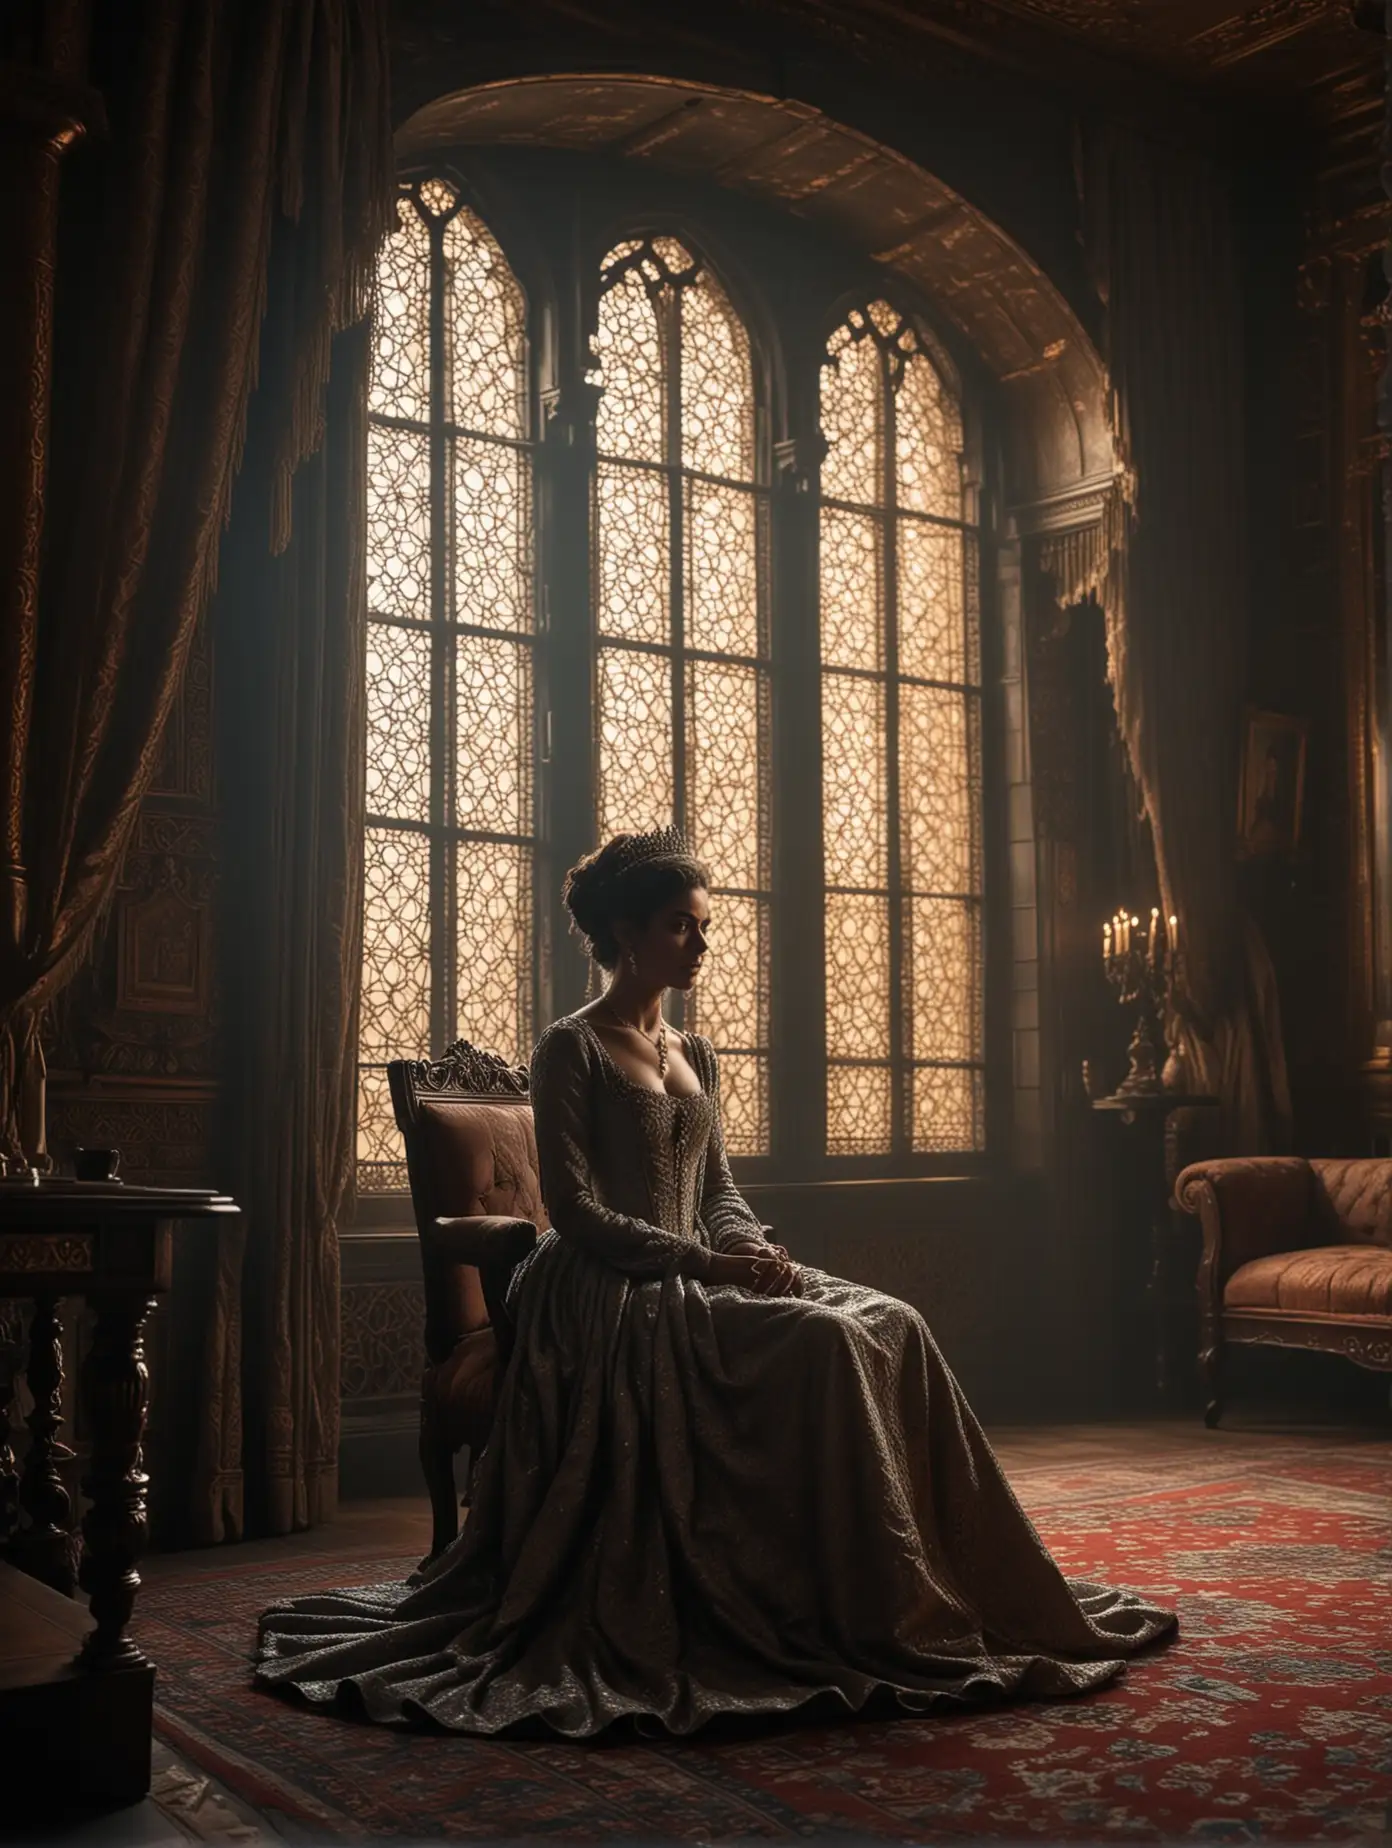 Queen Alicent Hightower brooding in a dimly lit royal bedroom, light gently glowing through latticed windows, dark dramatic lighting, plotting and scheming to seize power,

highly detailed, random details, imperfection, detailed colours hues tones patterns,